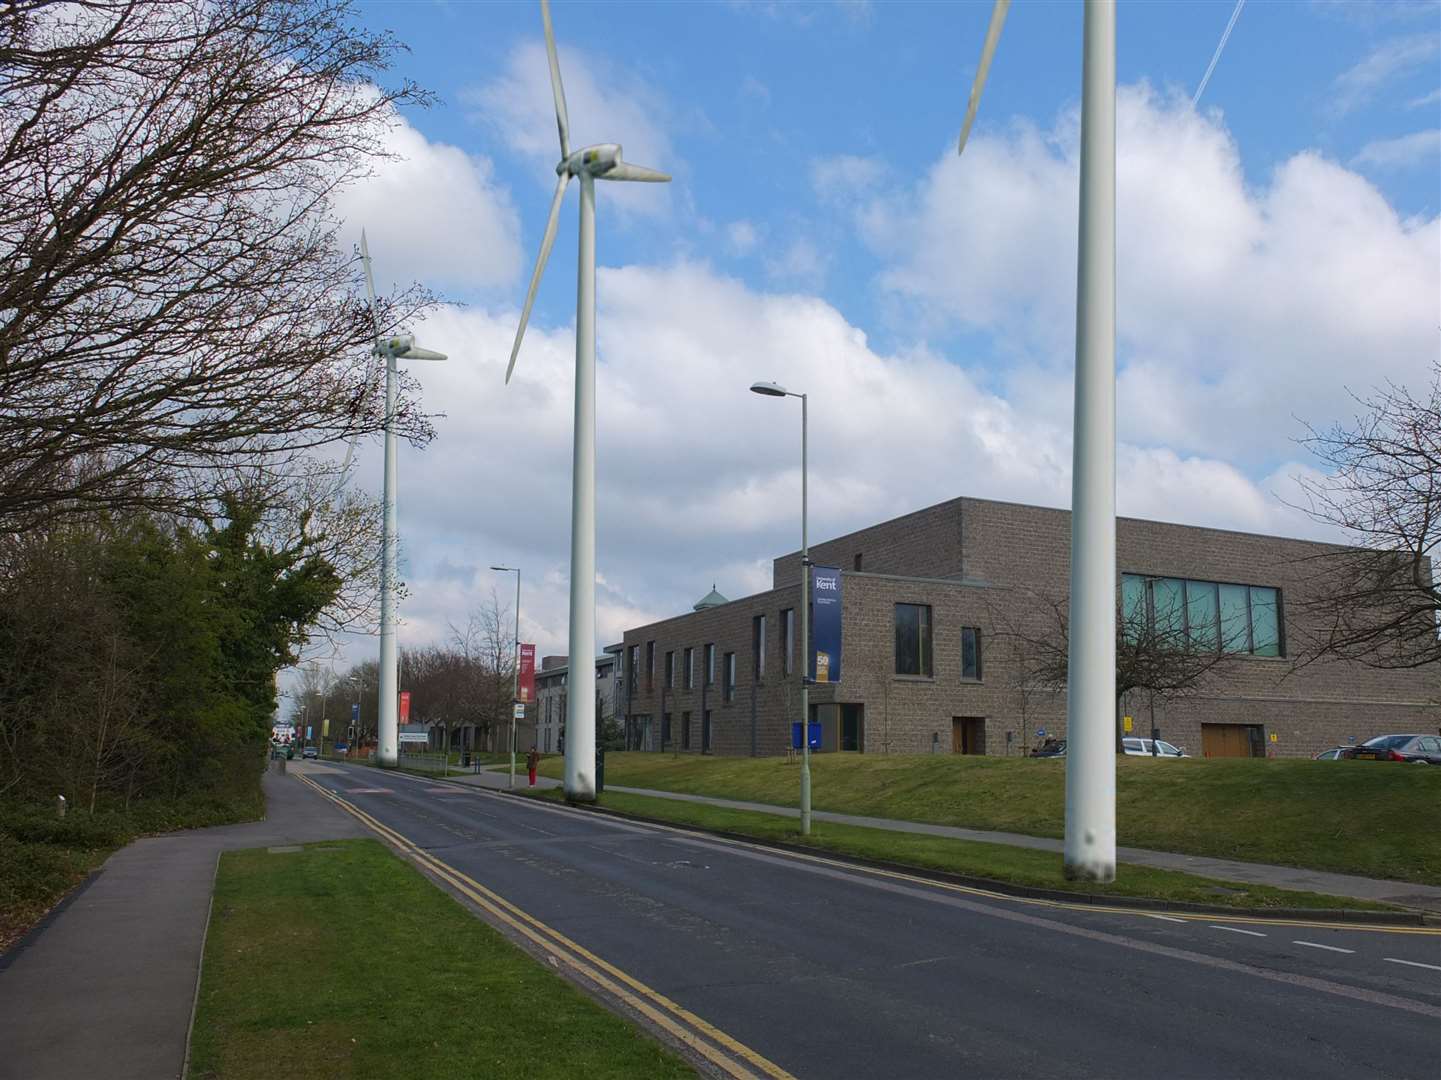 The windturbines at the UKC campus, as envisaged by The Canterbury Society (11640137)